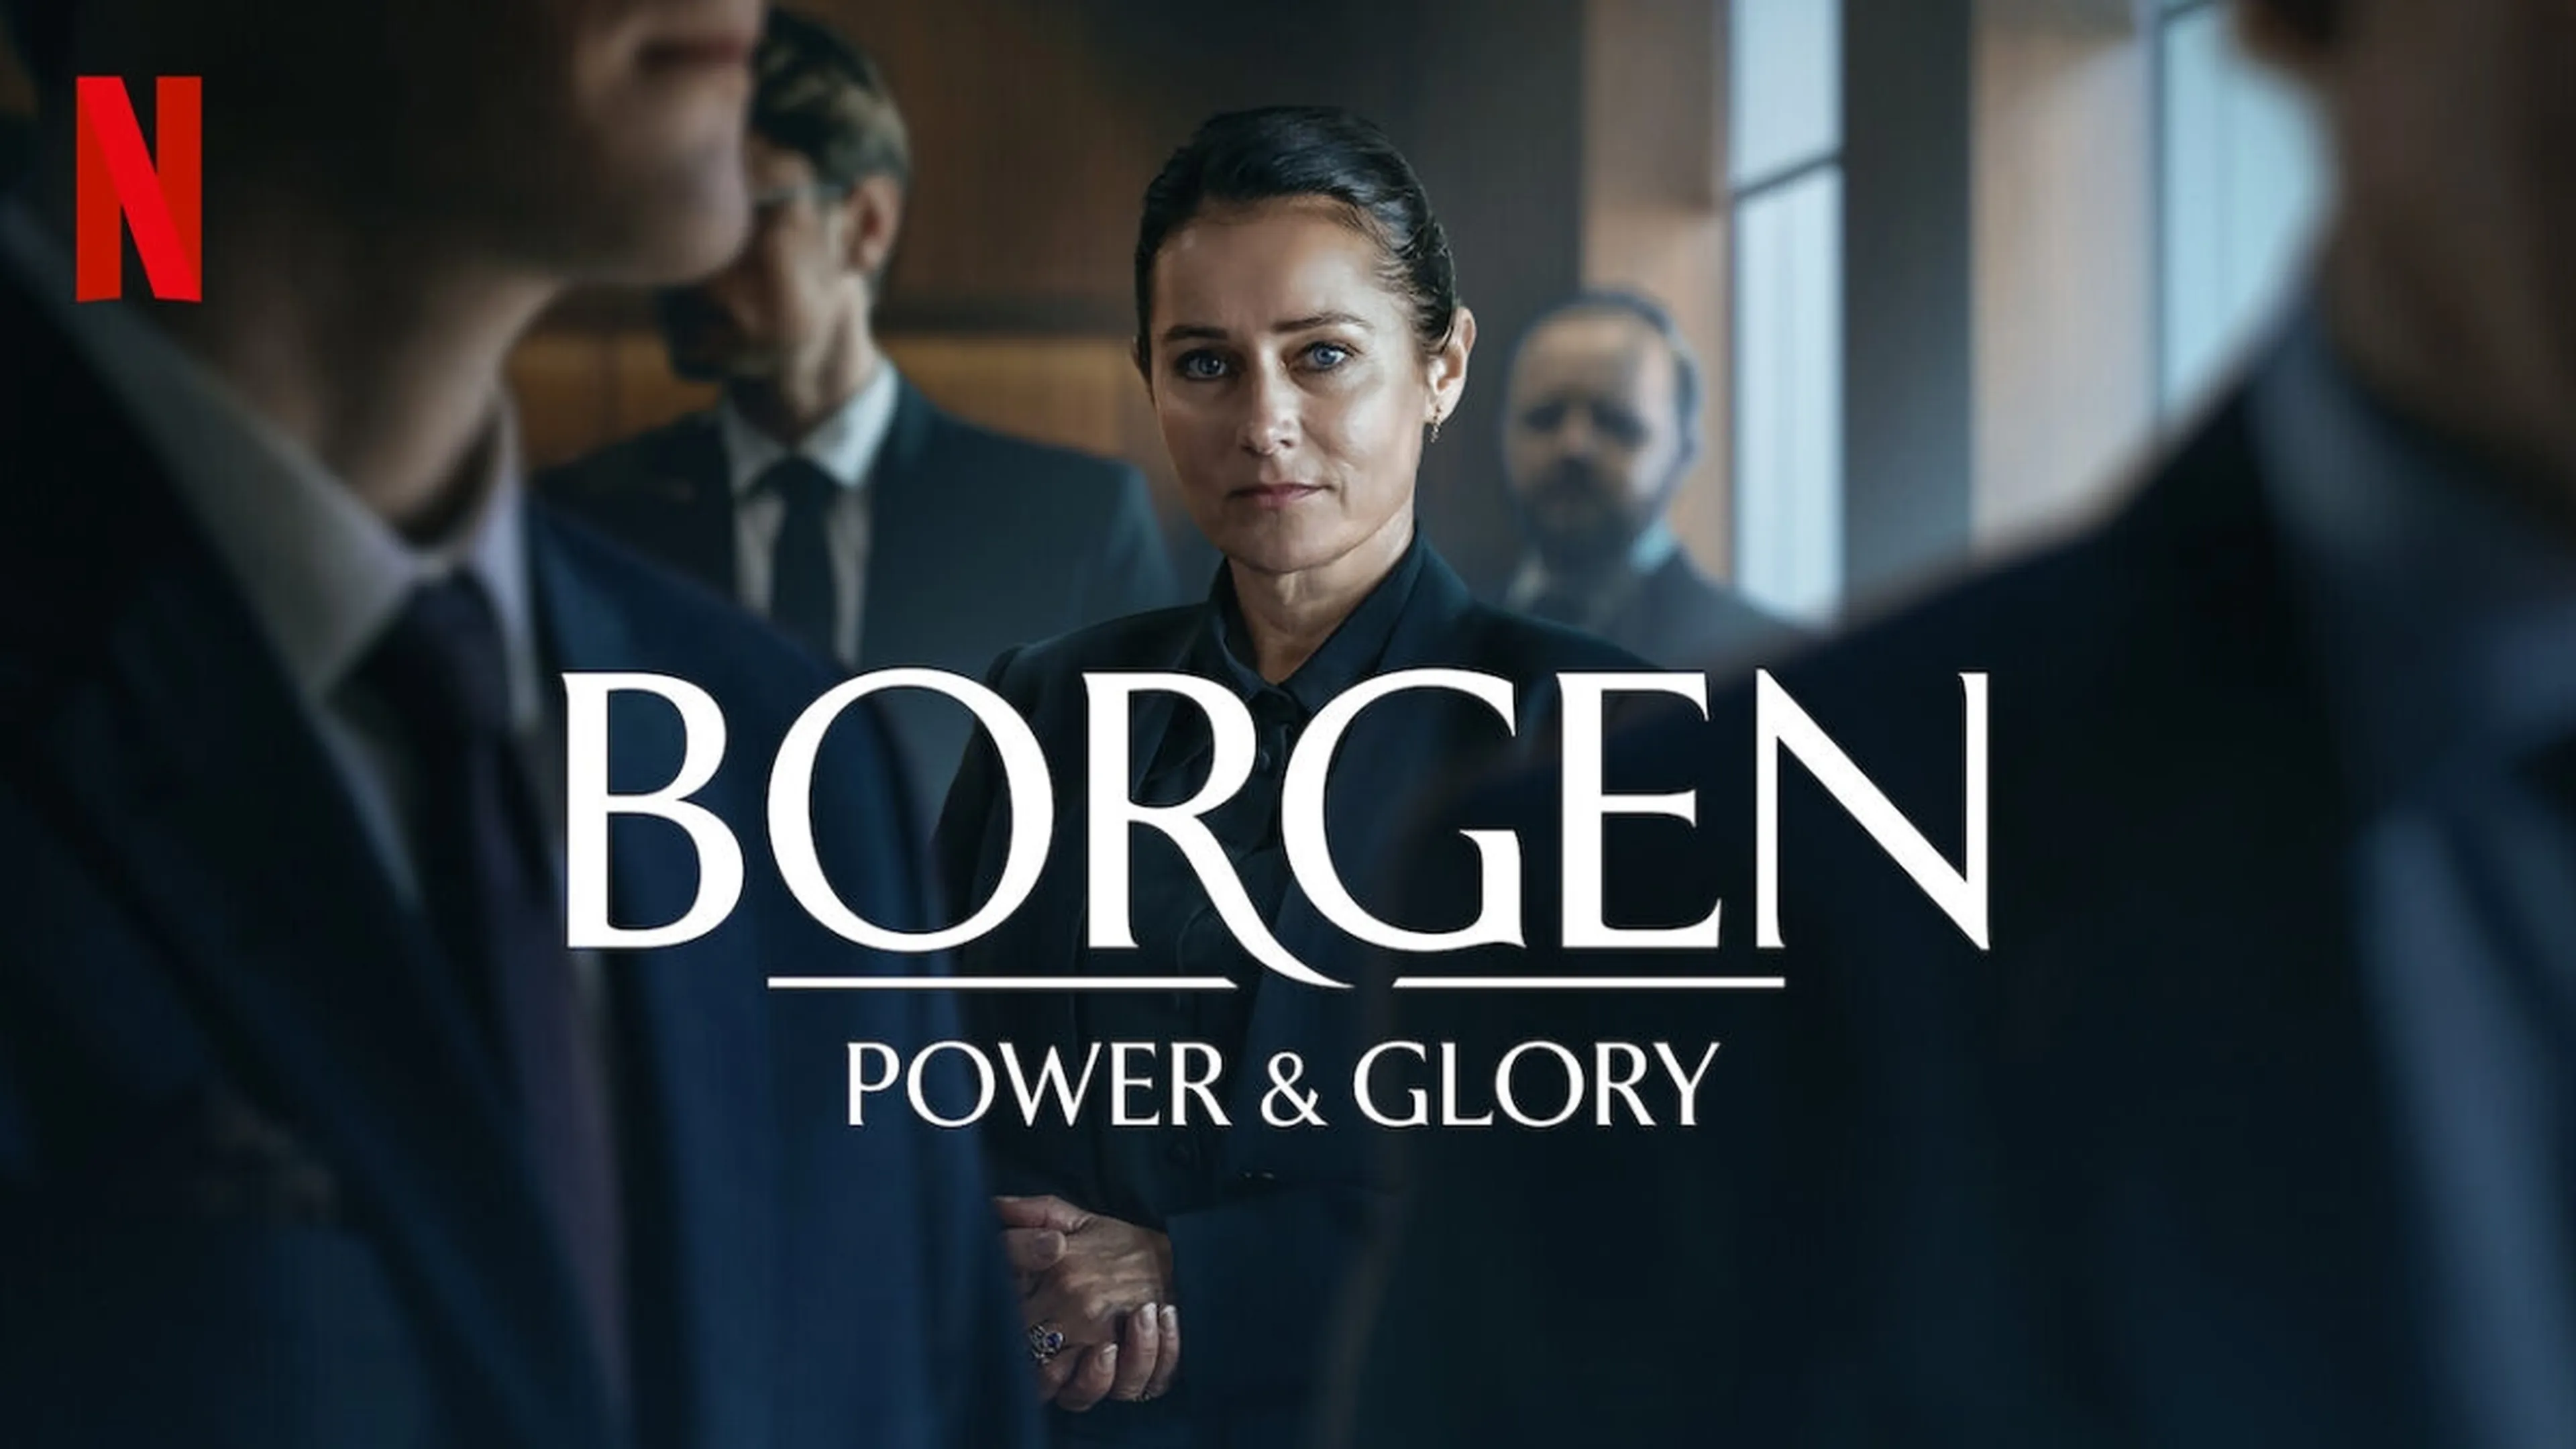 A few years ago, I wrote a number of articles on Borgen, The Crown, and ARGO – movies or series purportedly based on reality but that were really just dramatizations of institutions that were imagined by the producers and writers of the shows.